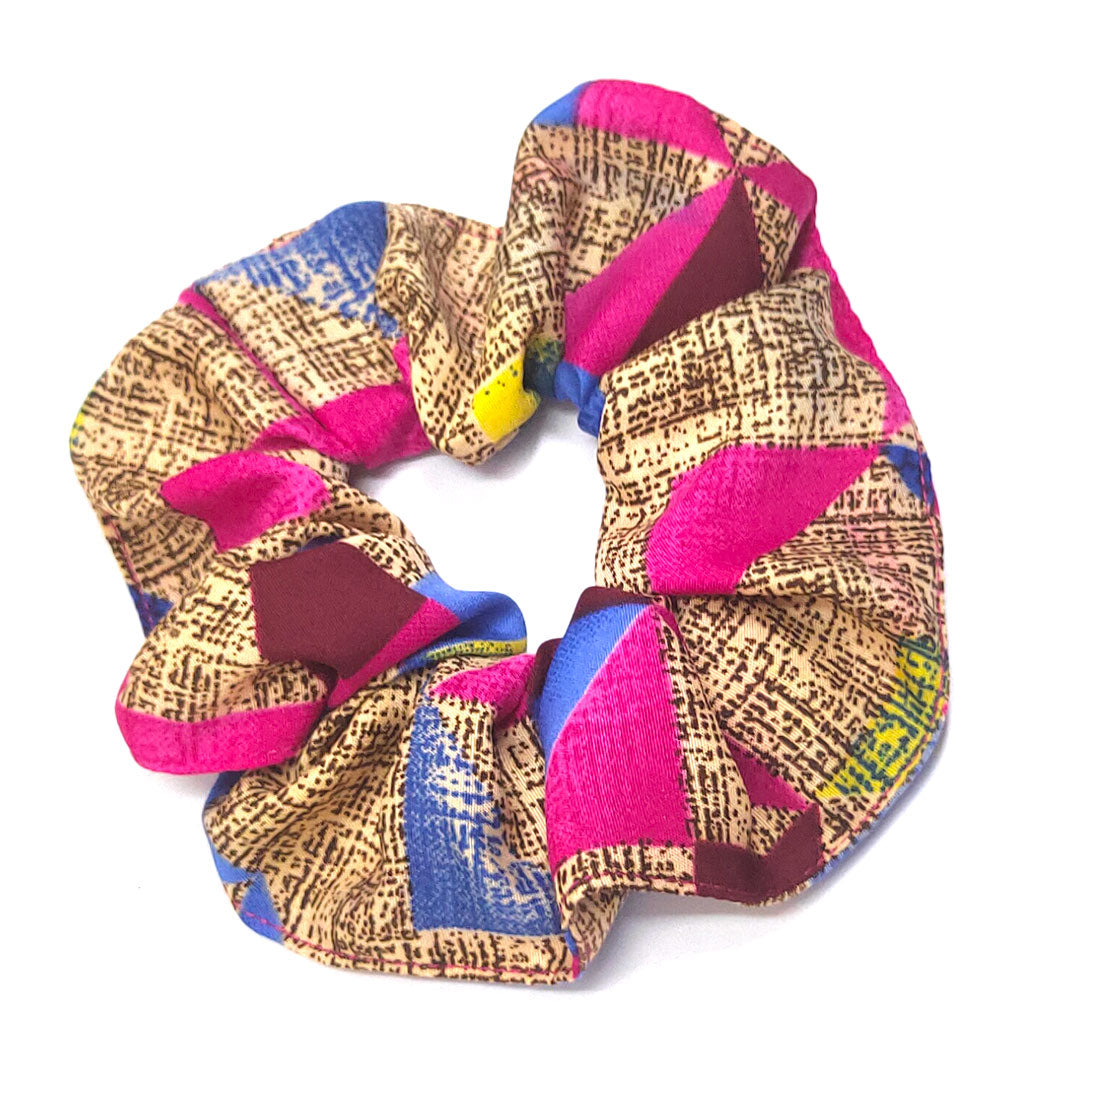 Anokhi Ada Handmade Large Scrunchies/Ponytail Holders for Girls and Women (Set of 4 Scrunchies, Multi-Colour)-05-17H